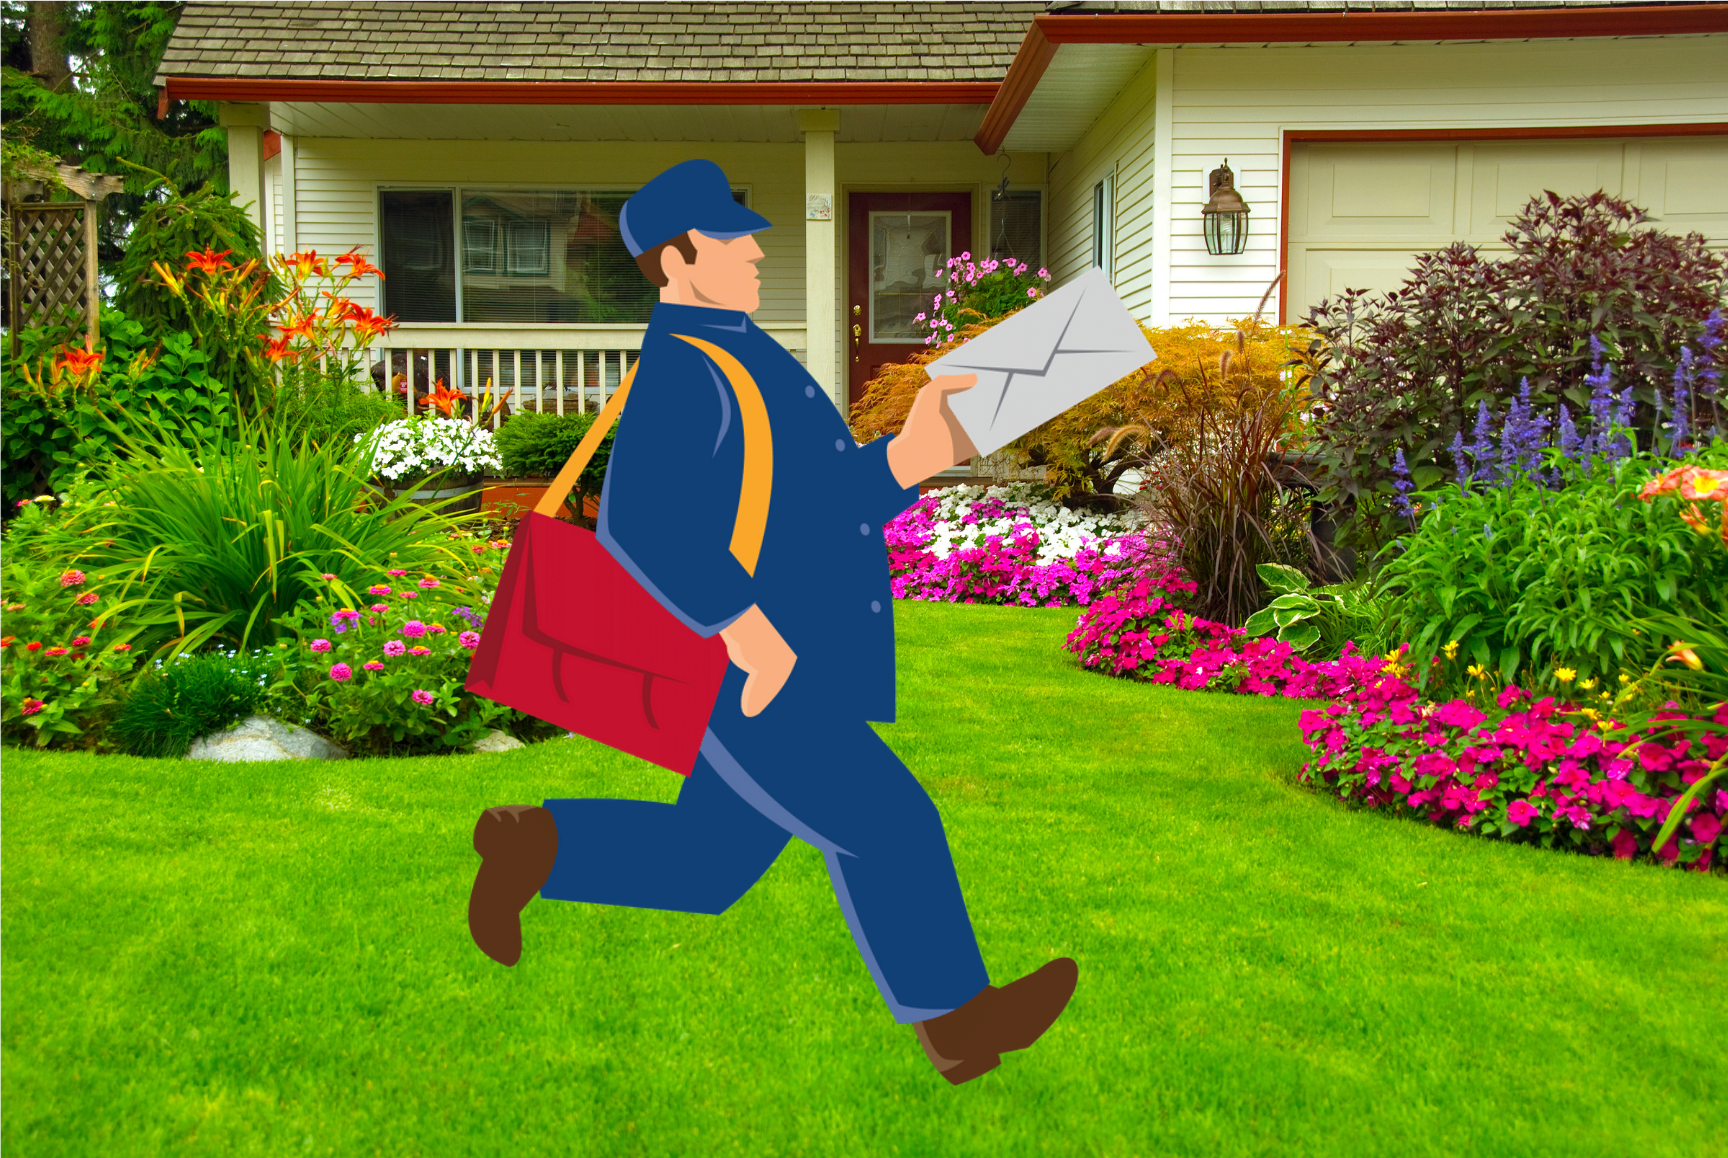 Can Postal Workers Walk on Your Lawn?